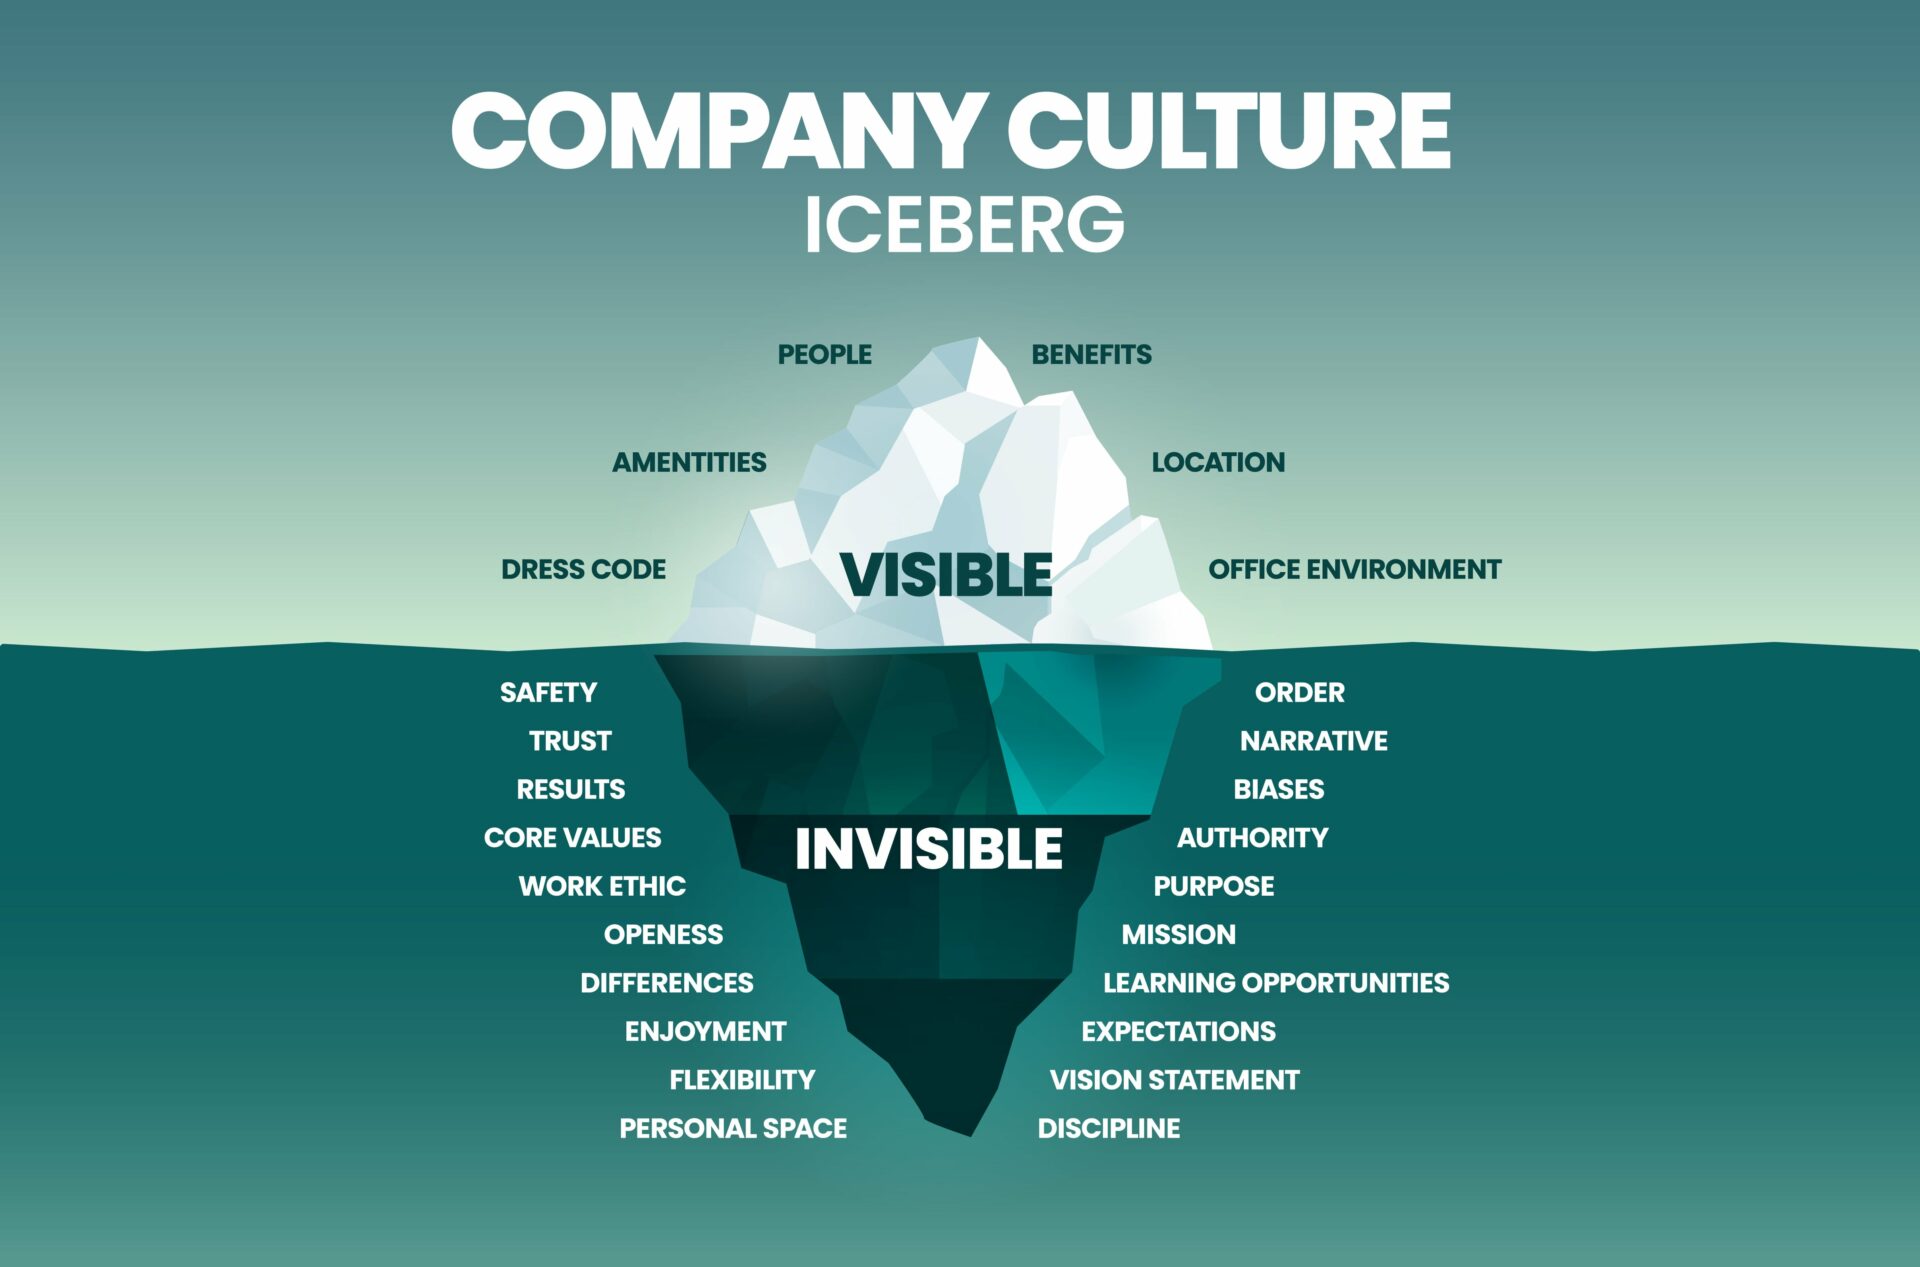 Company culture iceberg model designed based on discussions and questions asked after a company acquisition during a board meeting